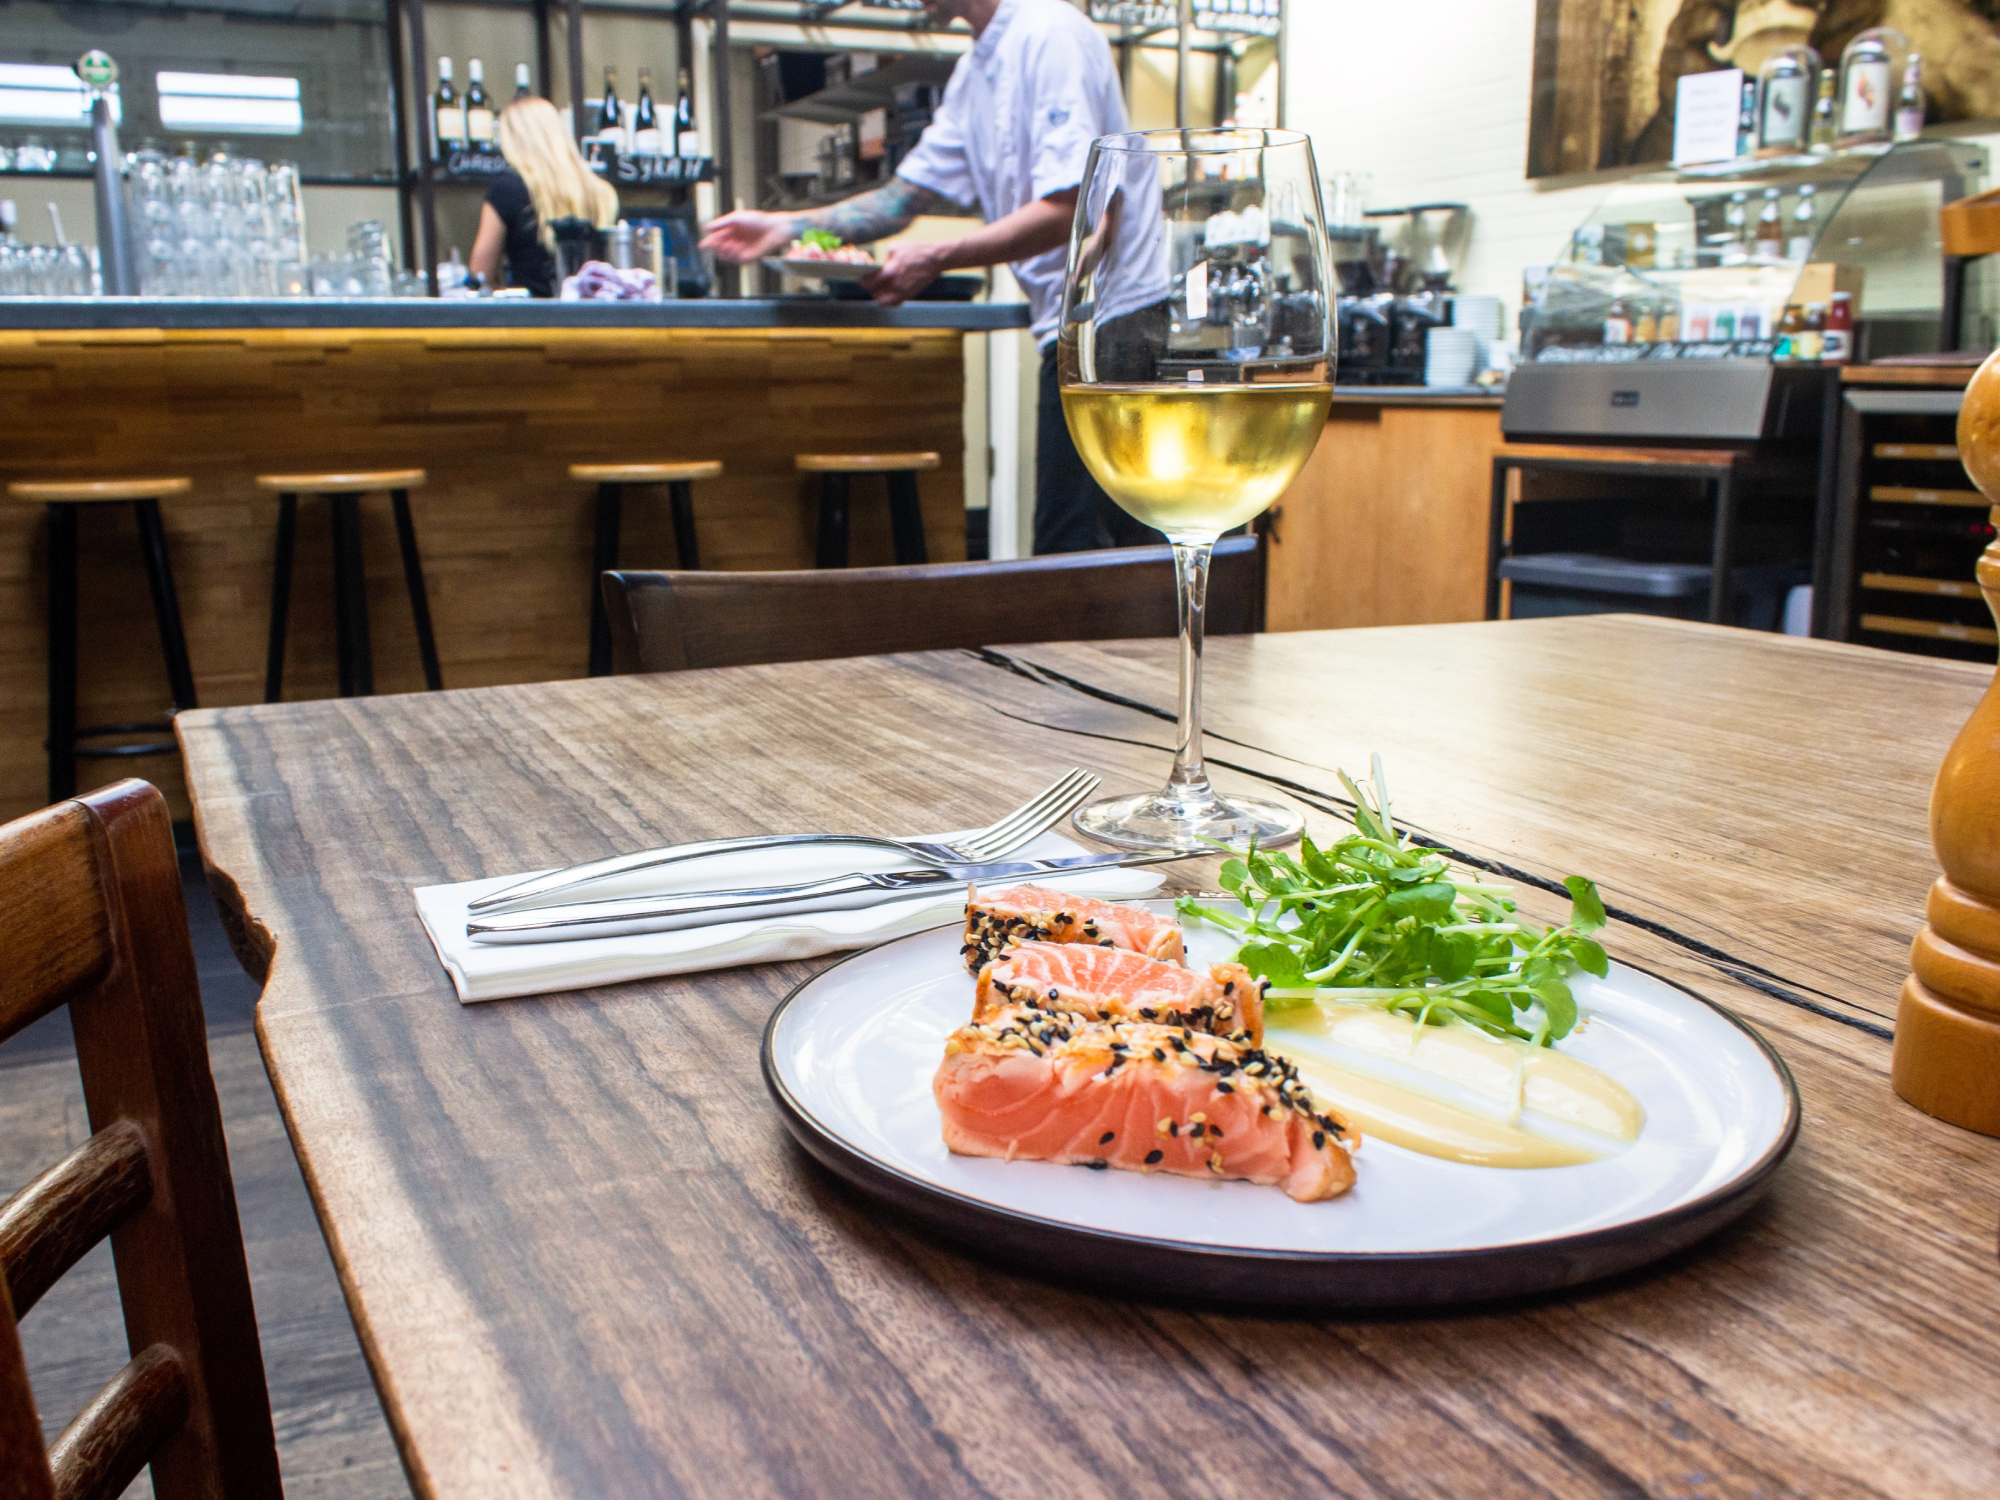 A cracked wooden table at a restaurant, with a glass of white wine and a white plate with salmon and greens on it.